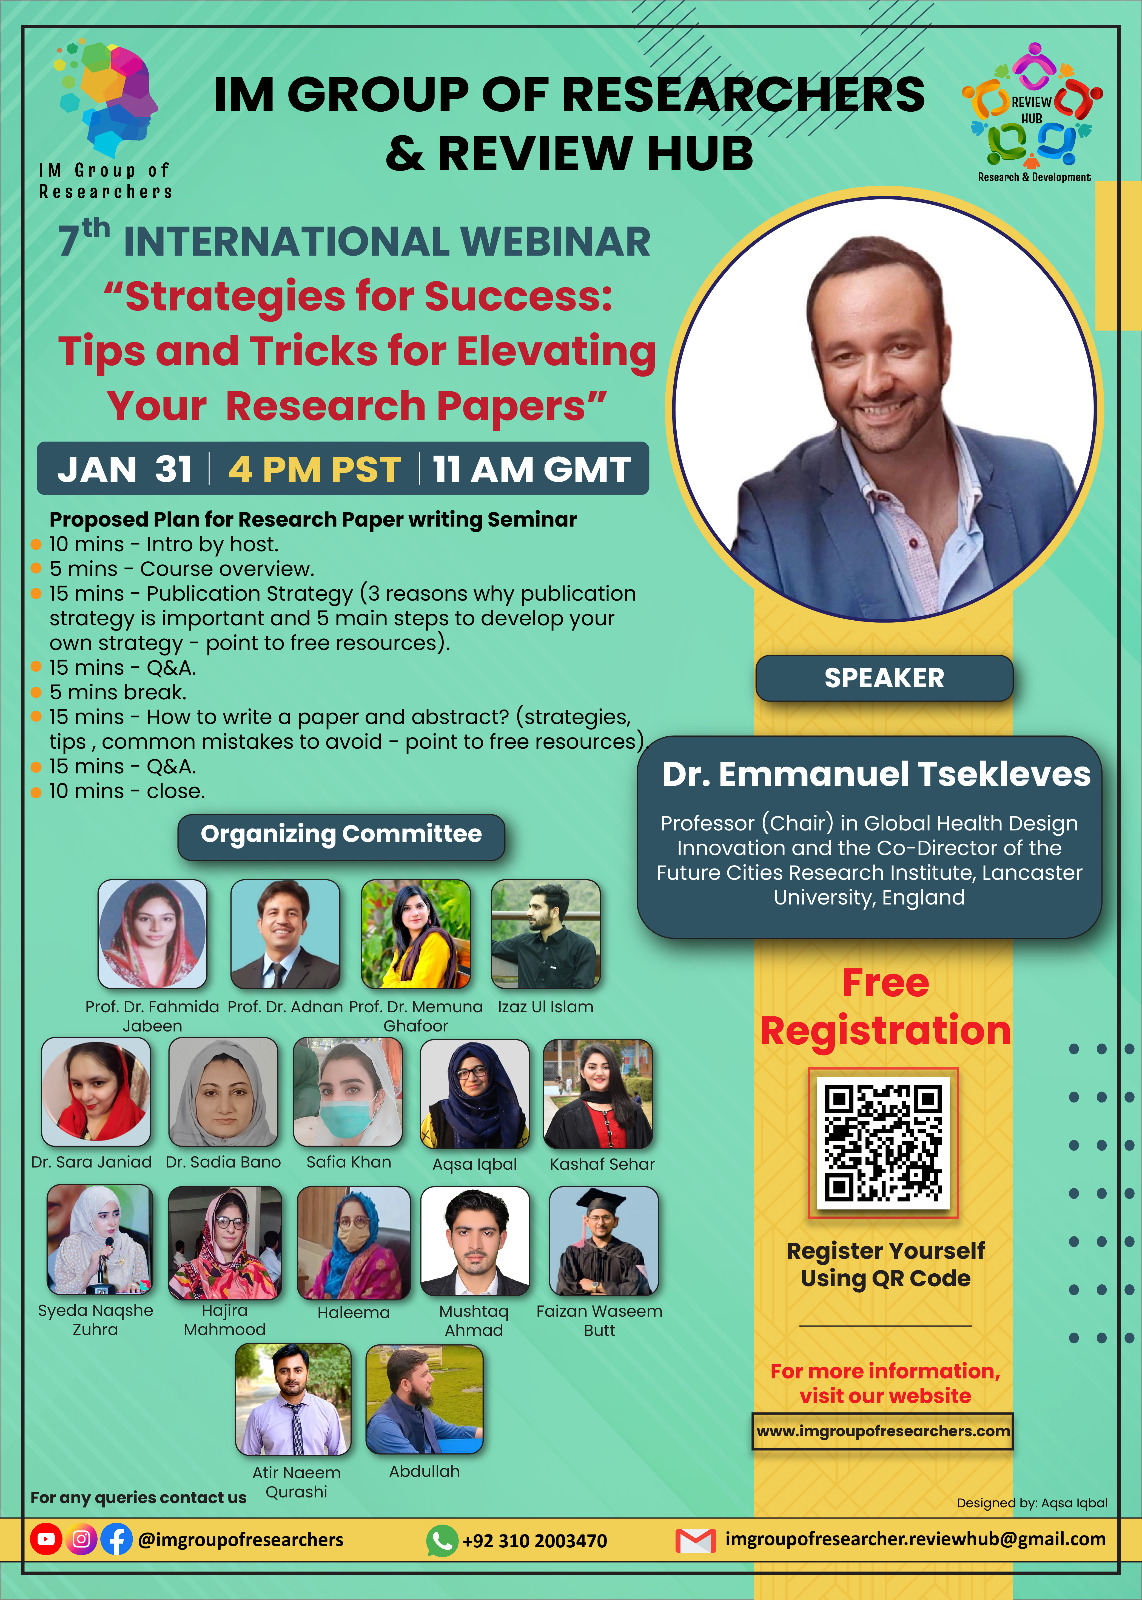 7th International Webinar on "Strategies for Success: Tips and Tricks for Elevating your Research Papers"